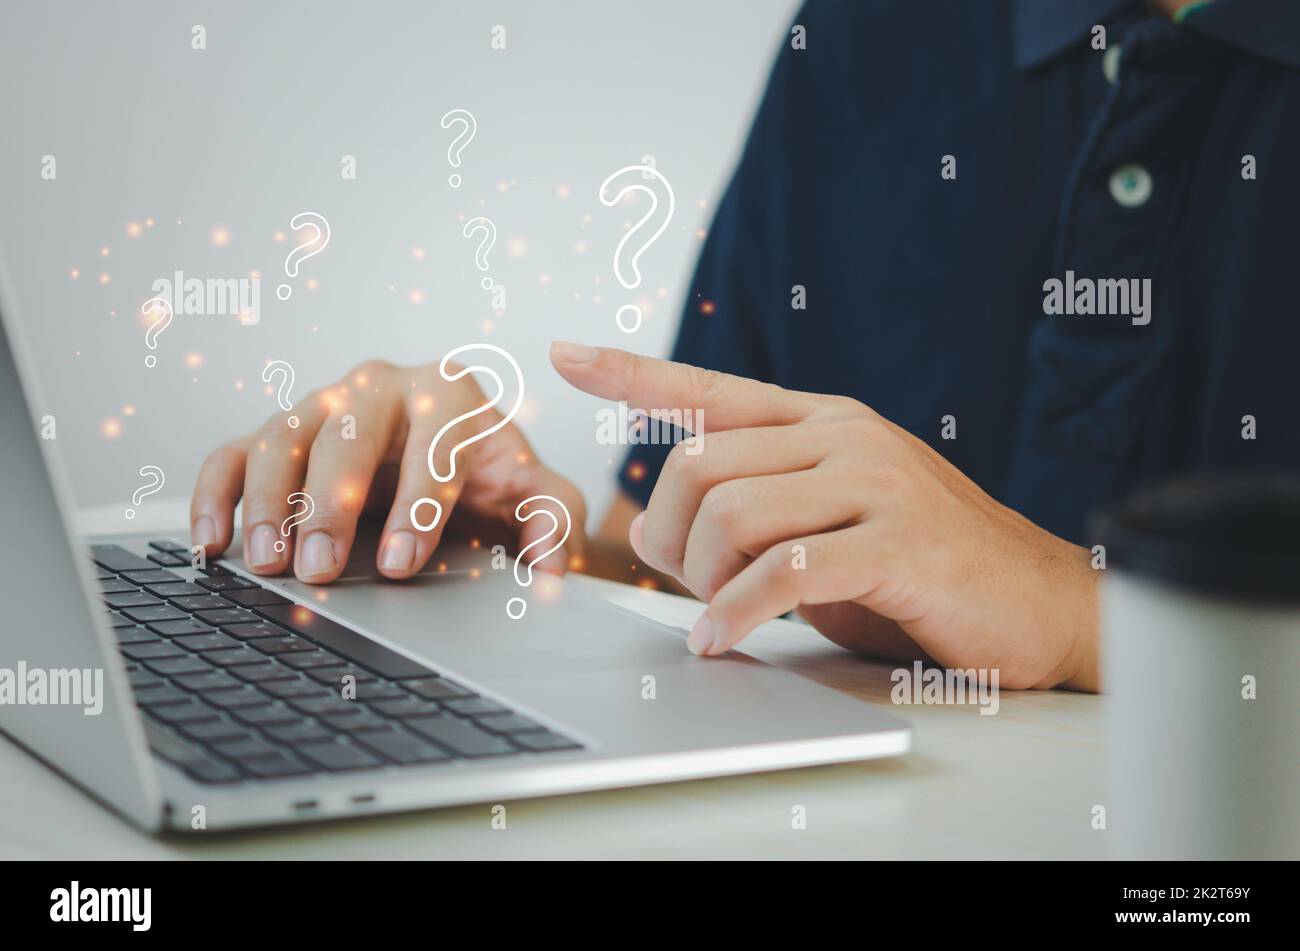 businessman pointing a question mark. Business computer technology concept. Stock Photo